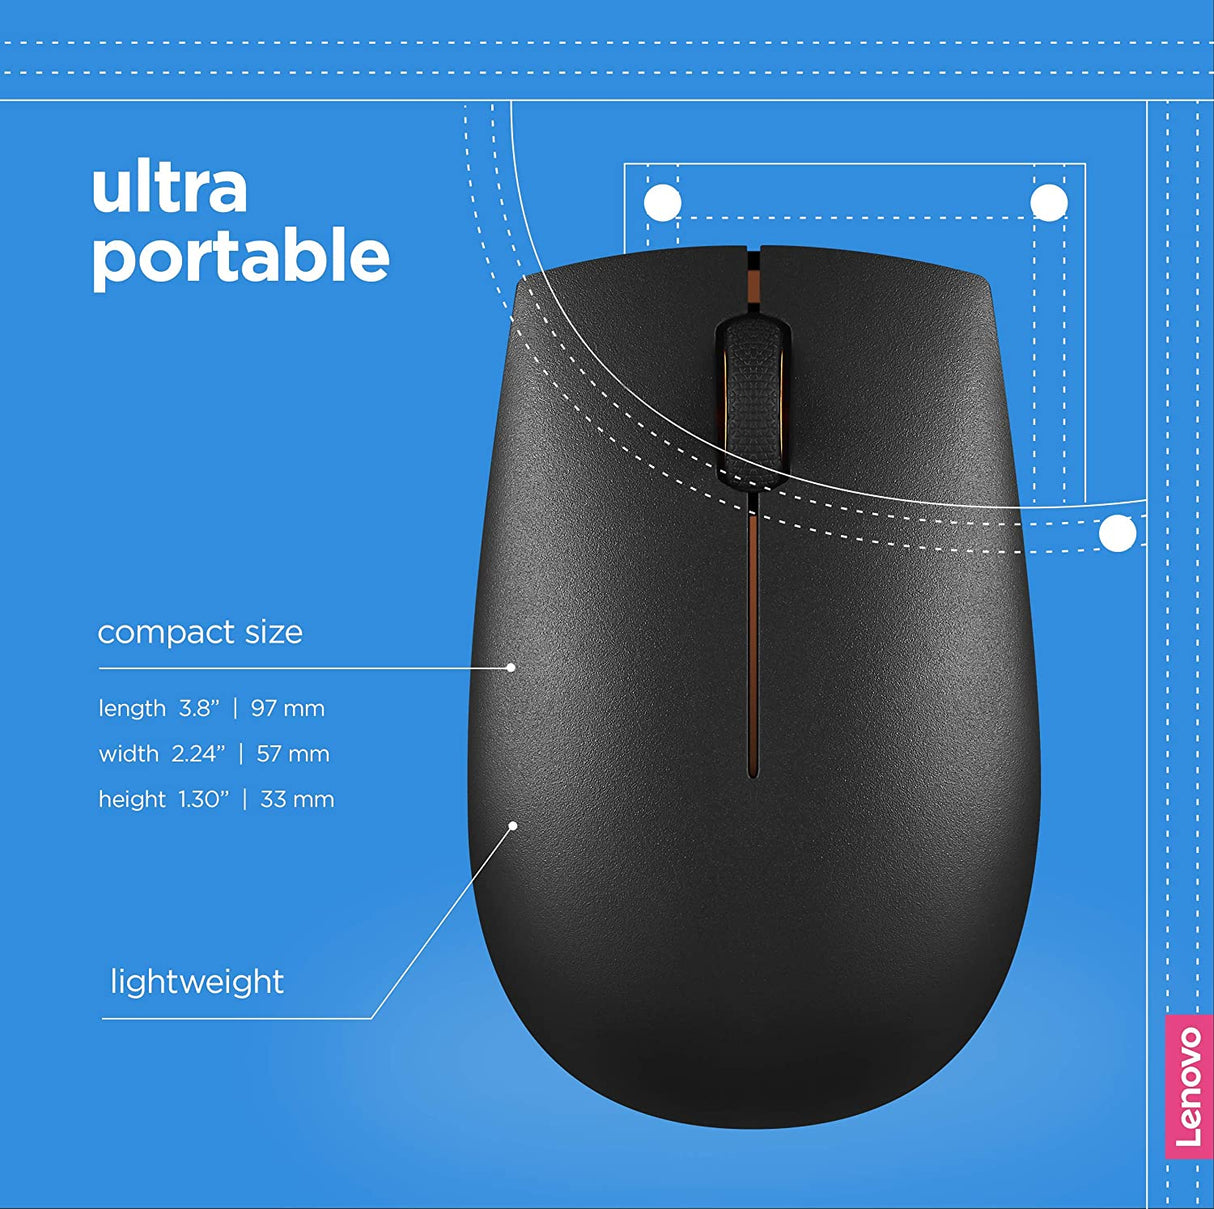 Lenovo 300 Wireless Compact Mouse, Black, 1000 dpi, Ultra-portable design, Up to 12 months battery life, GX30K79402